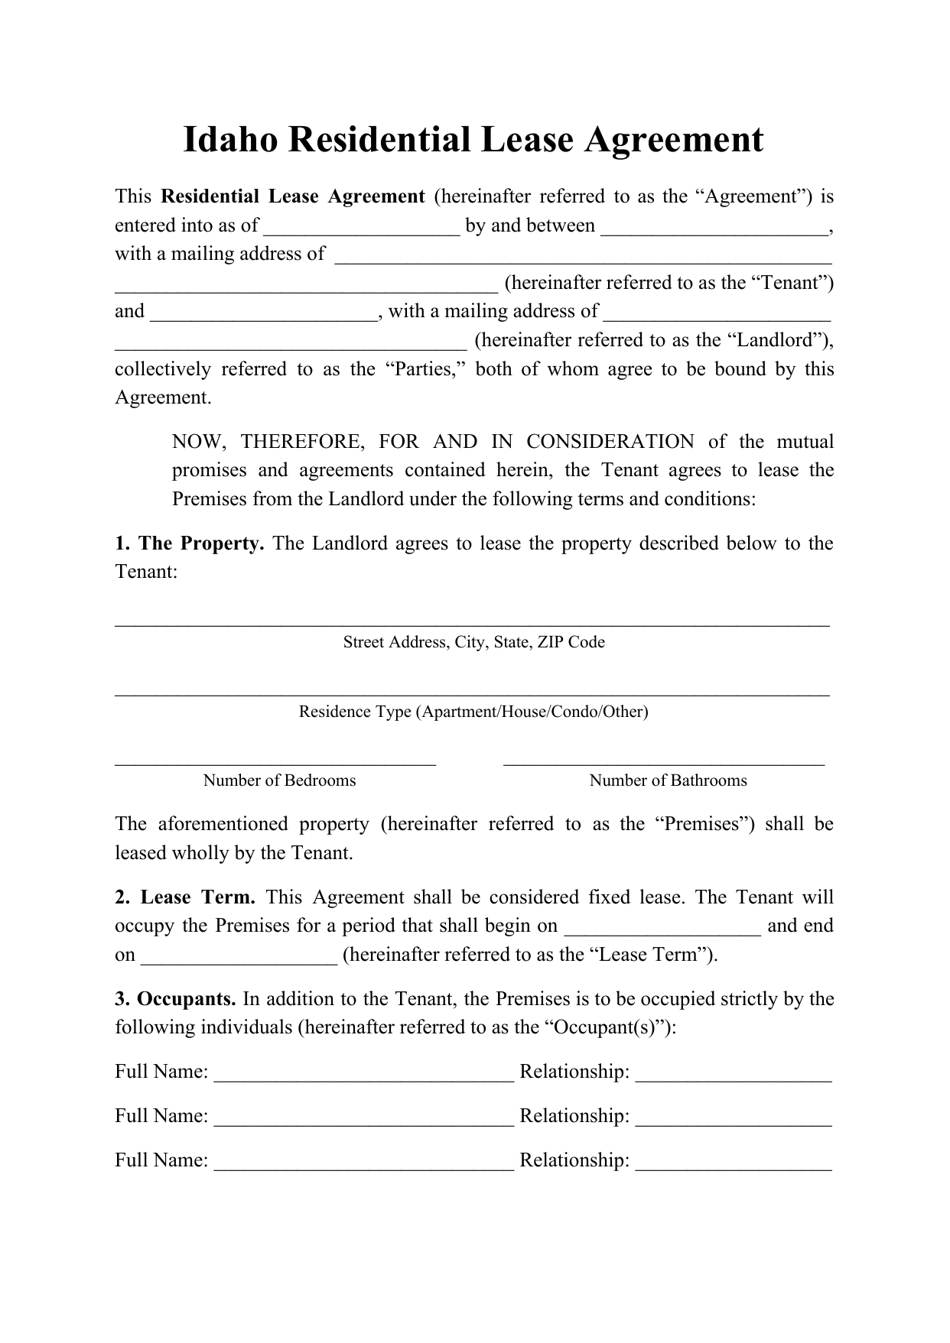 Residential Lease Agreement Template - Idaho, Page 1